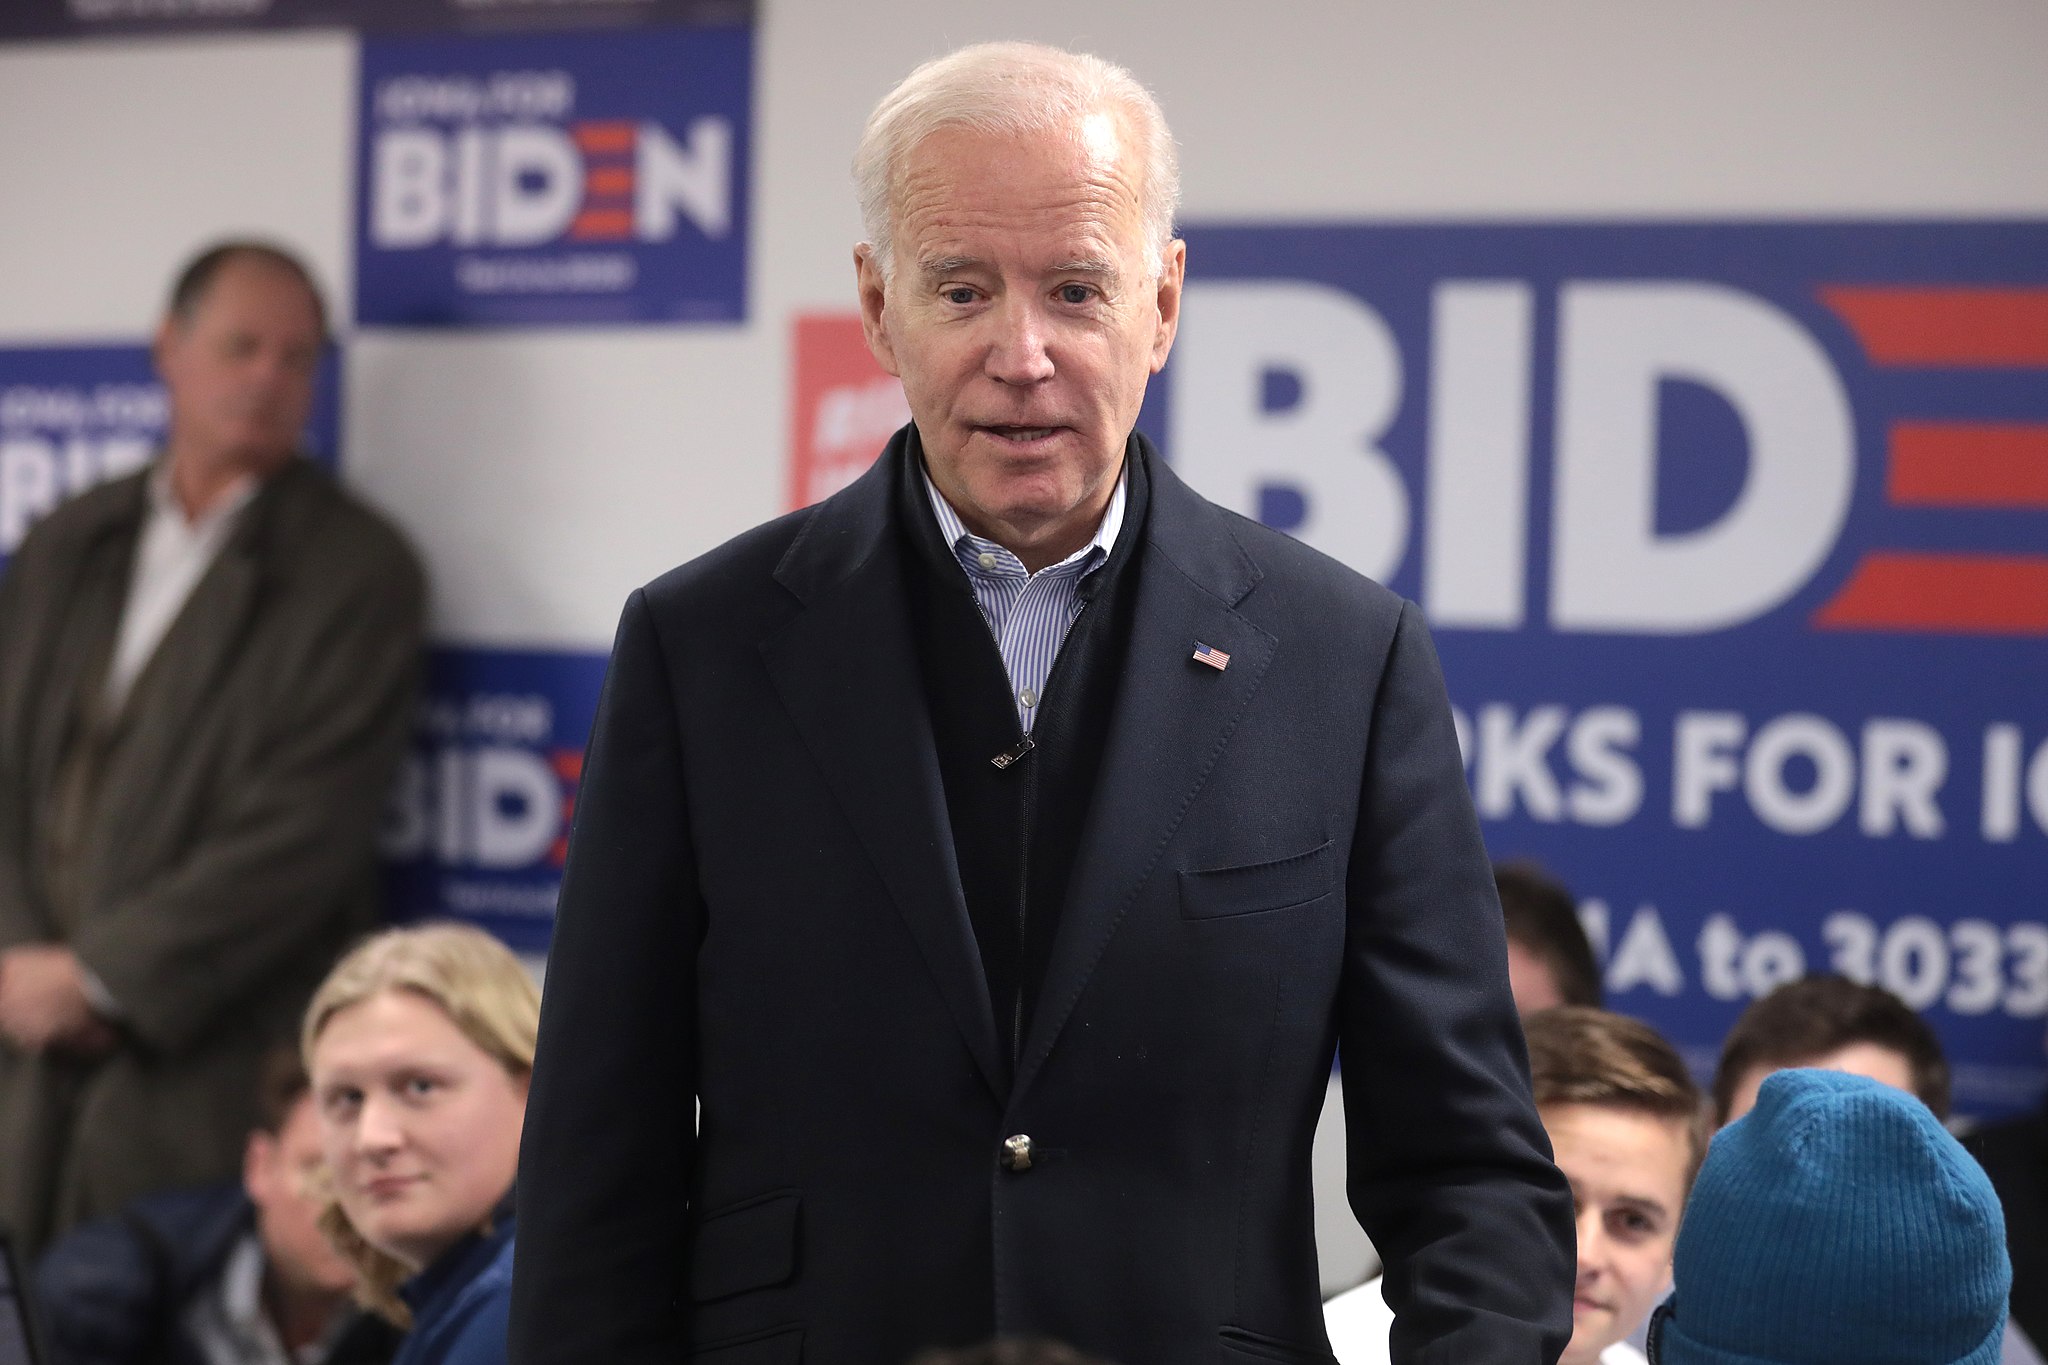 Is The Biden Administration A Complete Disaster?